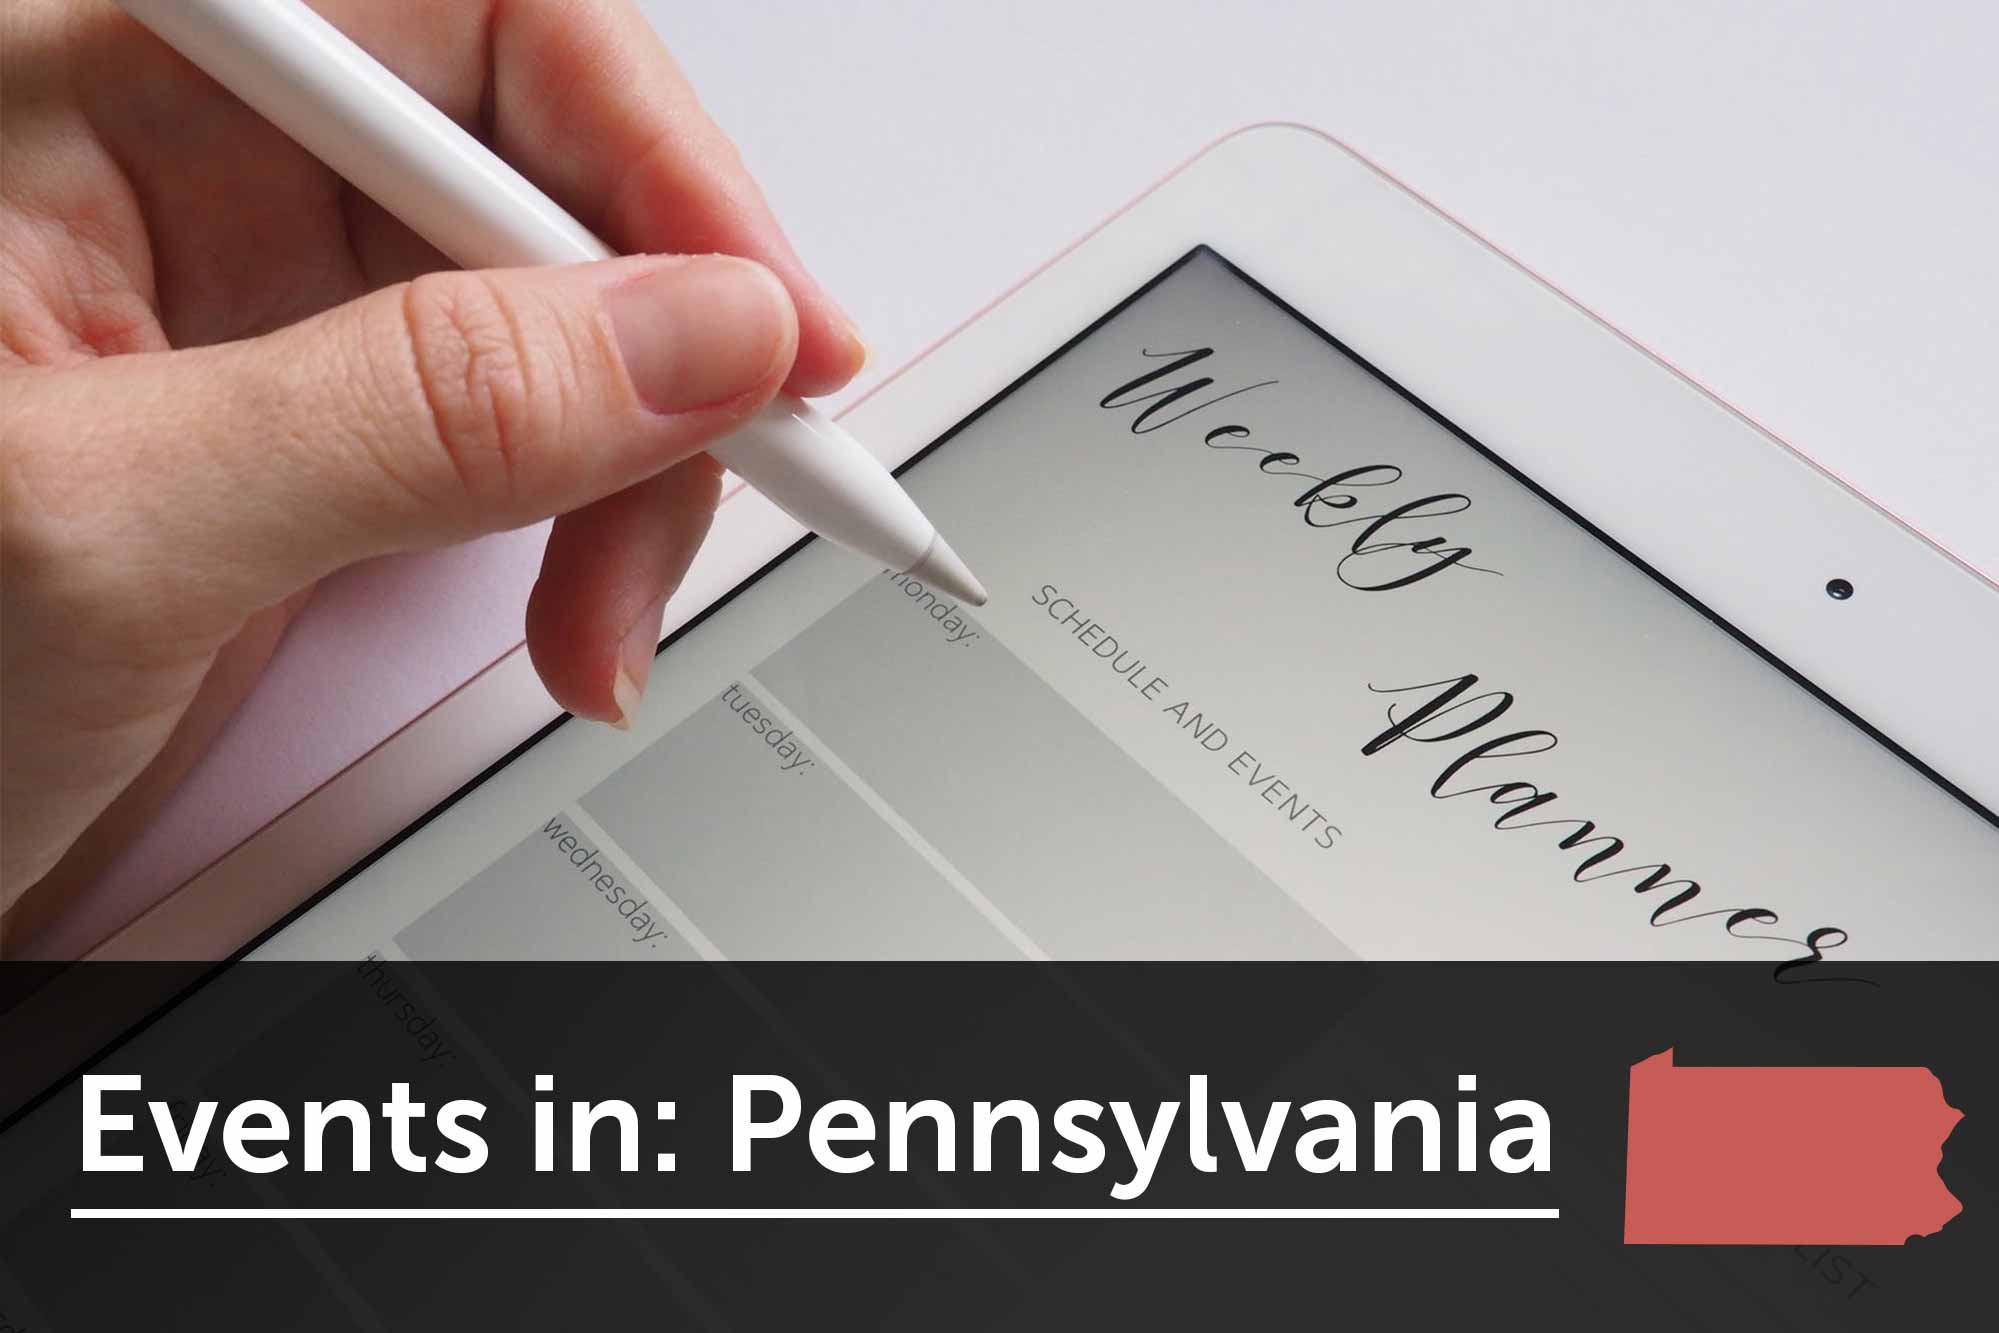 Women's business events in Pennsylvania